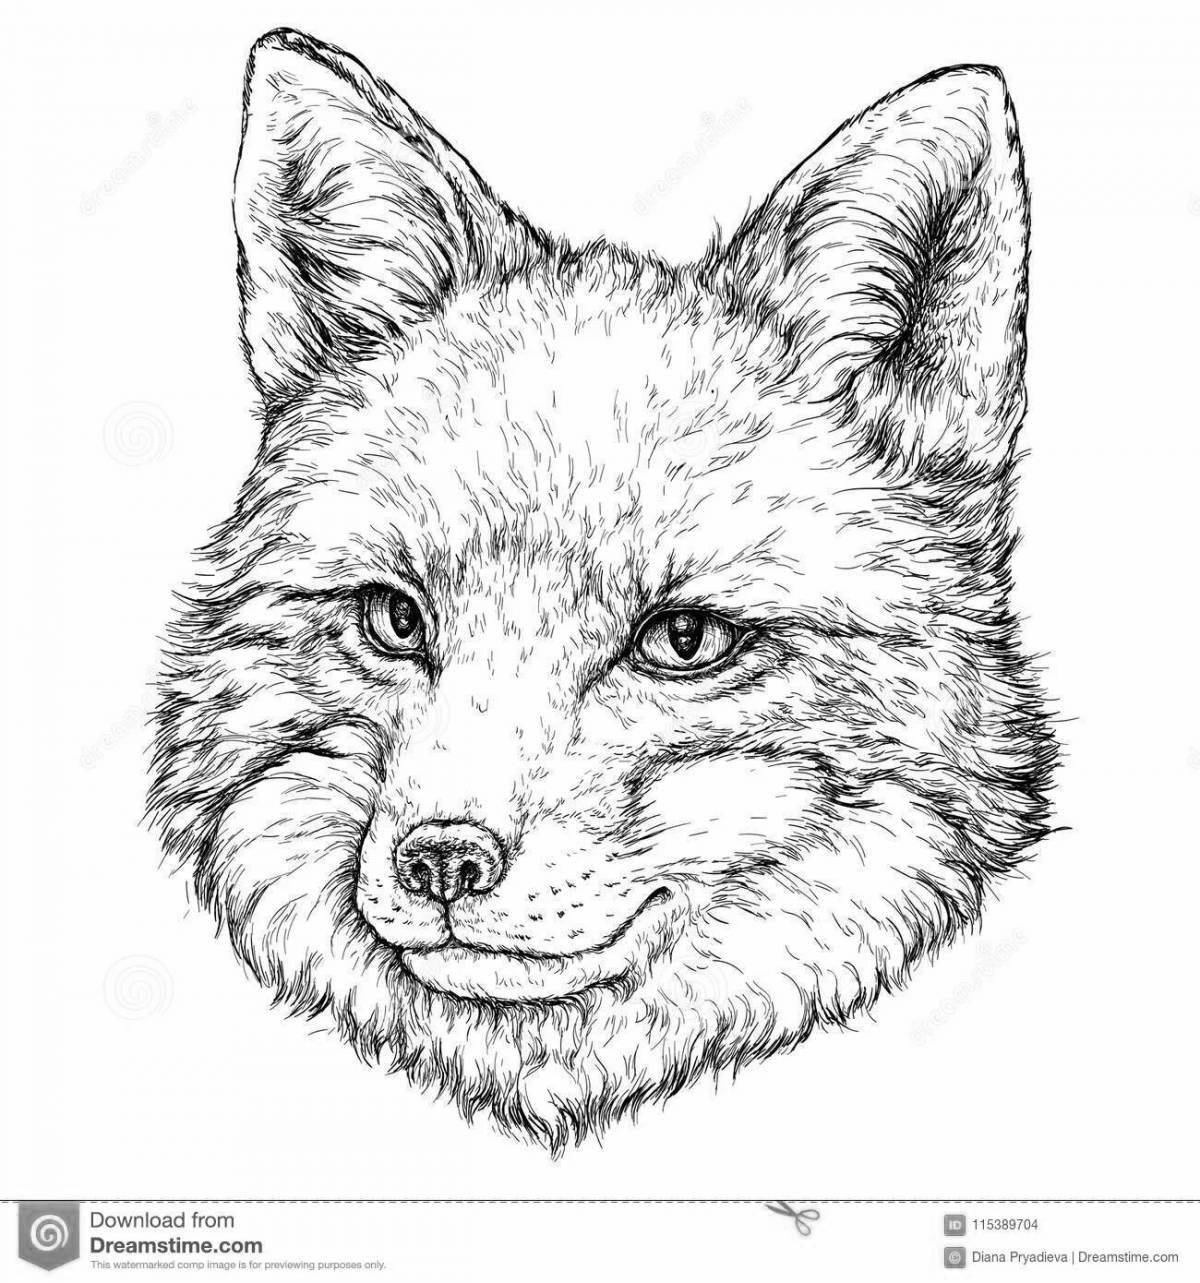 Cute fox coloring page